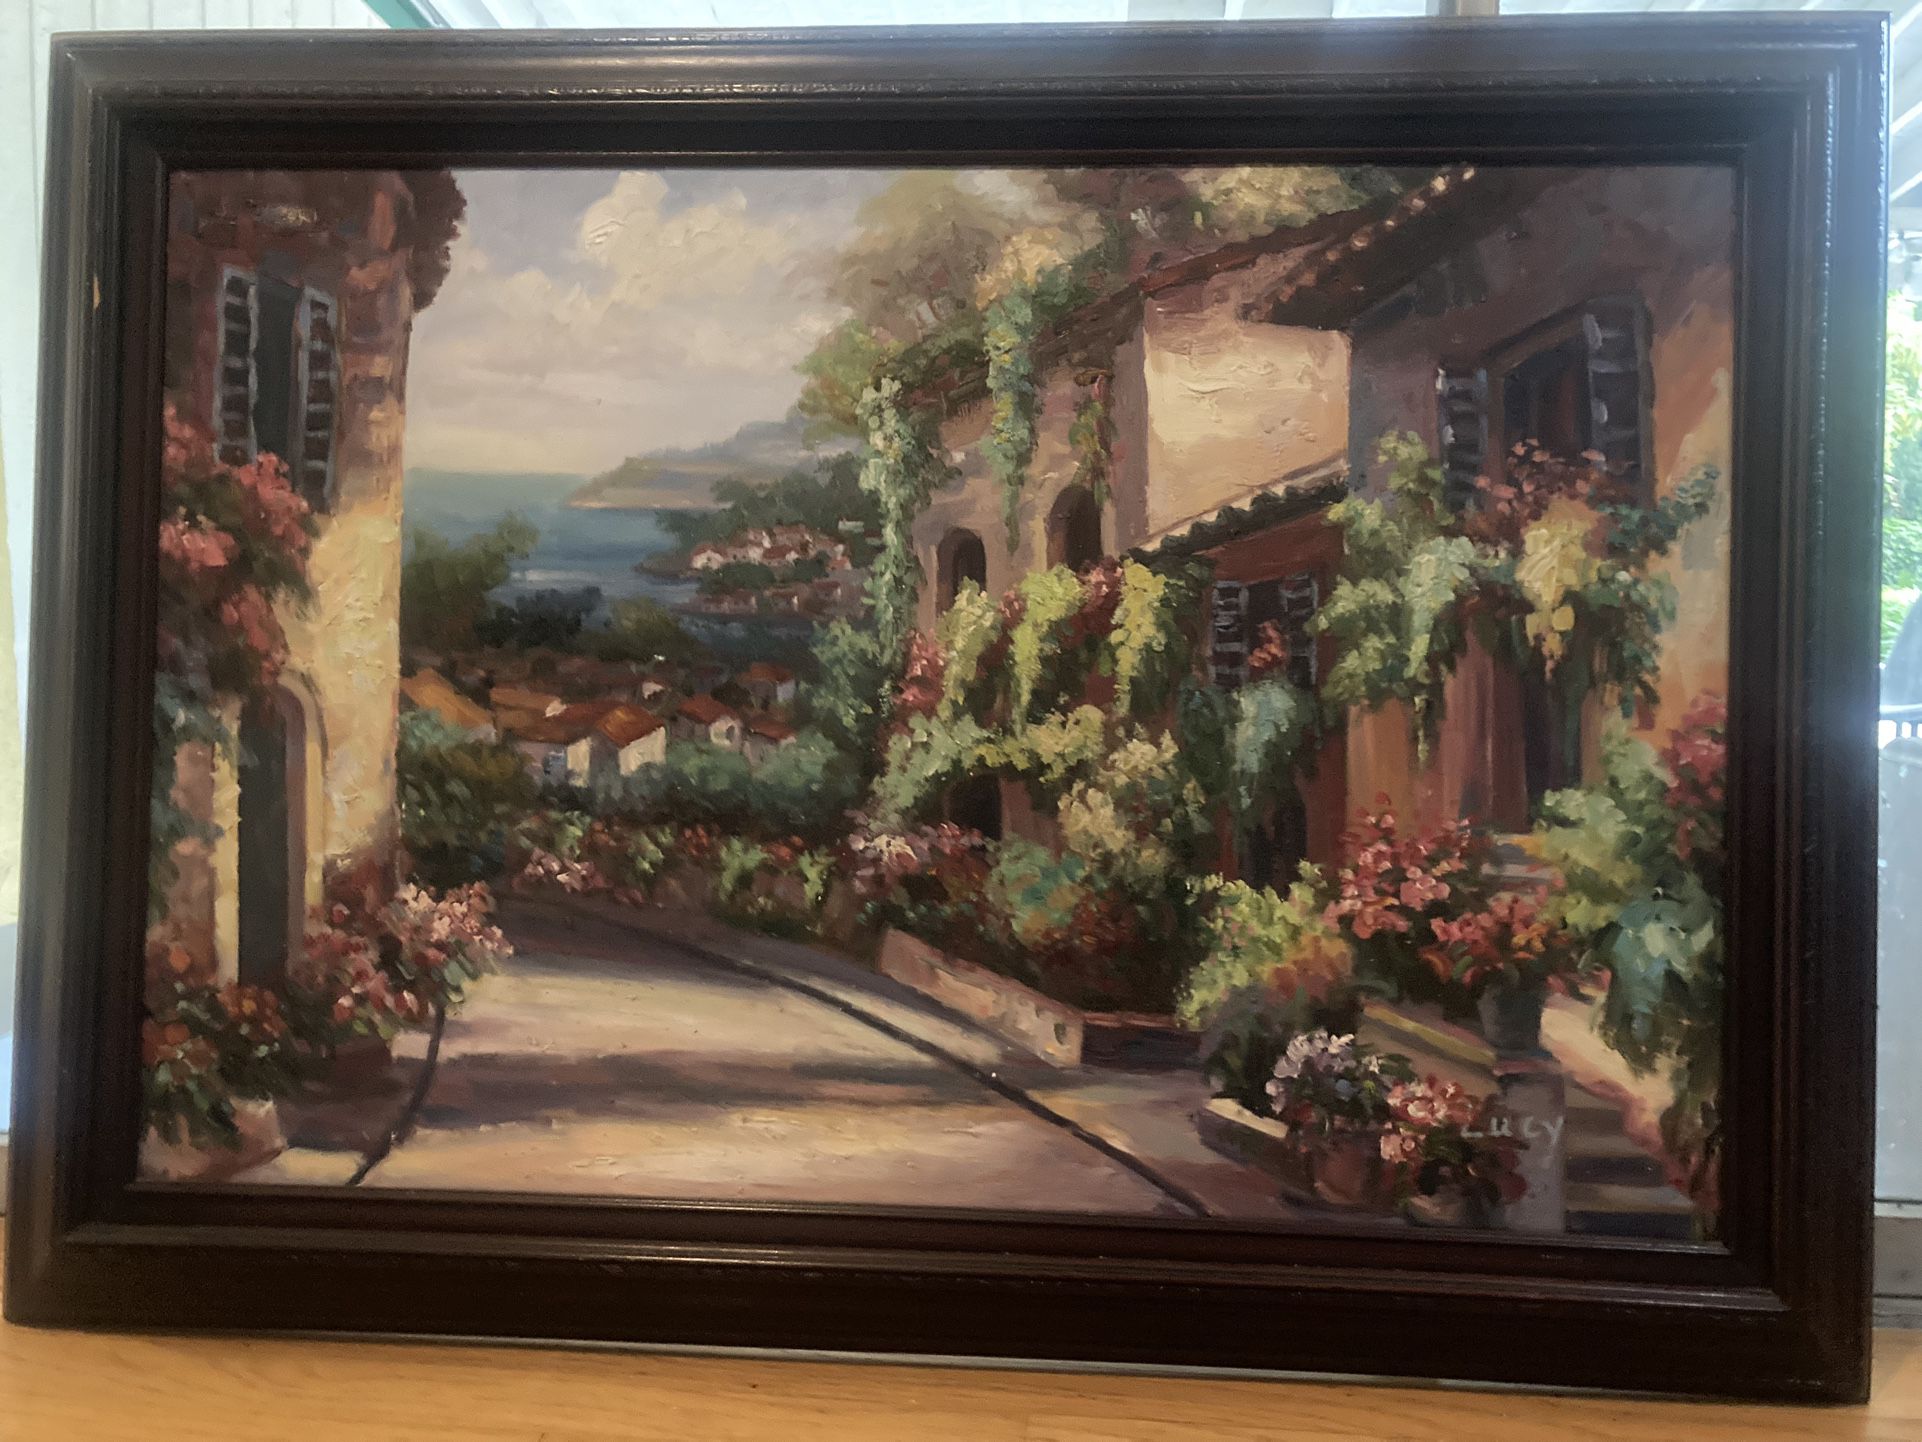 Somewhere In Italy Painting.